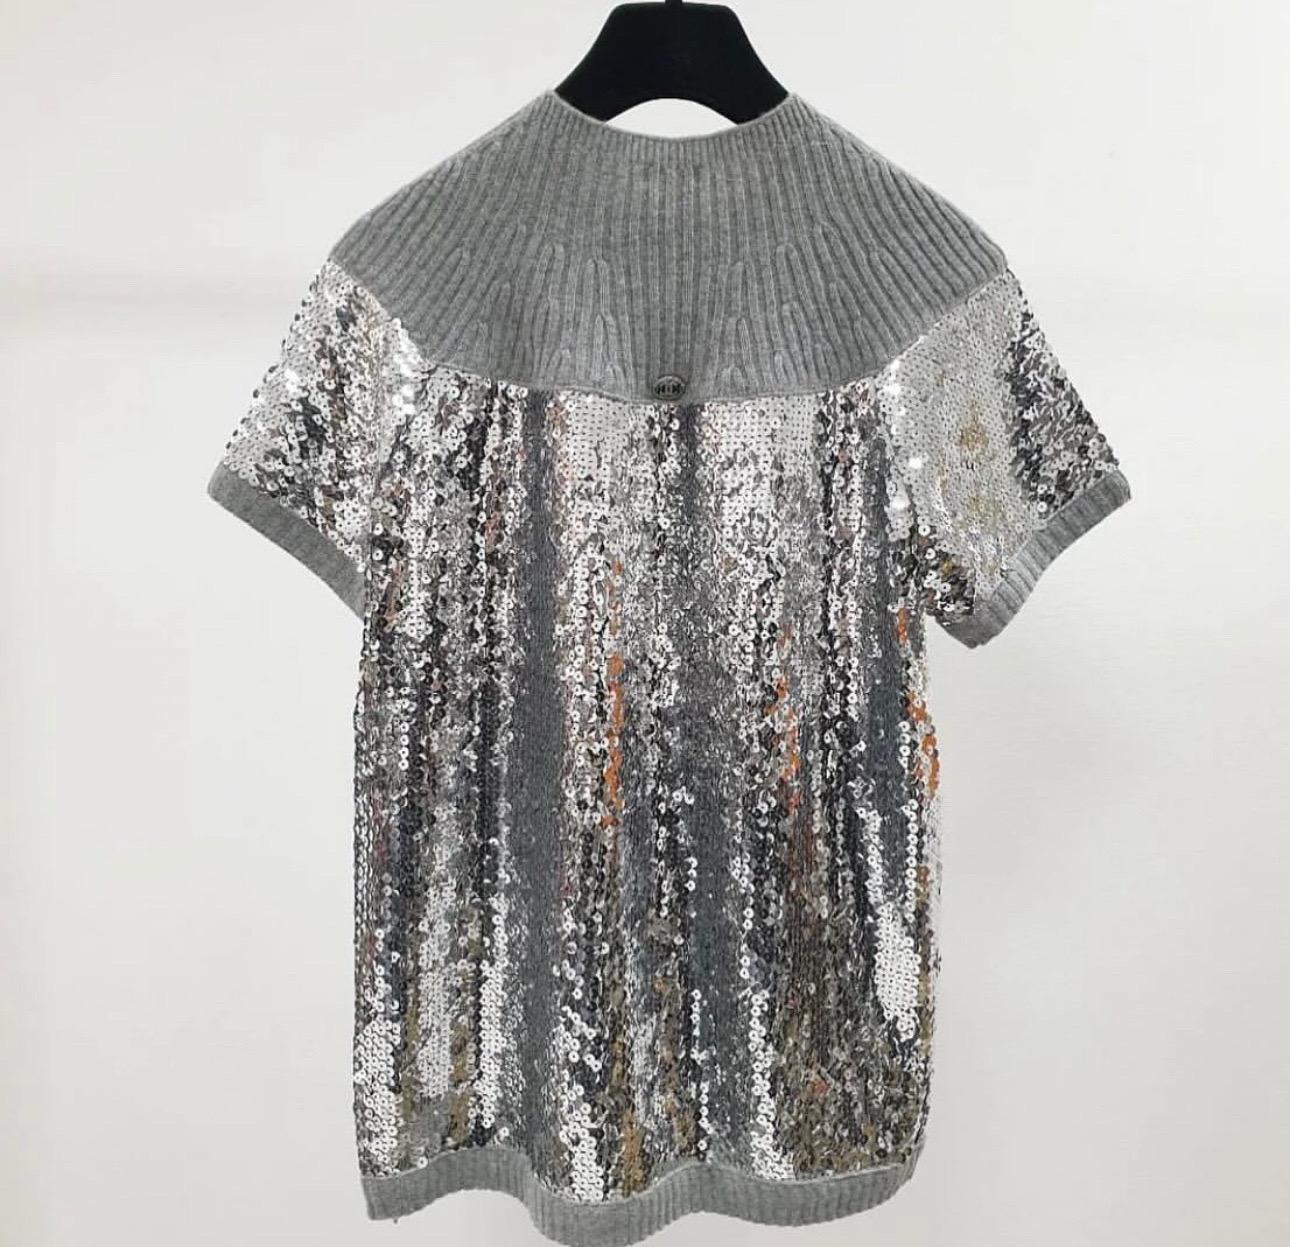 Chanel Sequin Cashmere Sweater Top In Excellent Condition For Sale In Krakow, PL